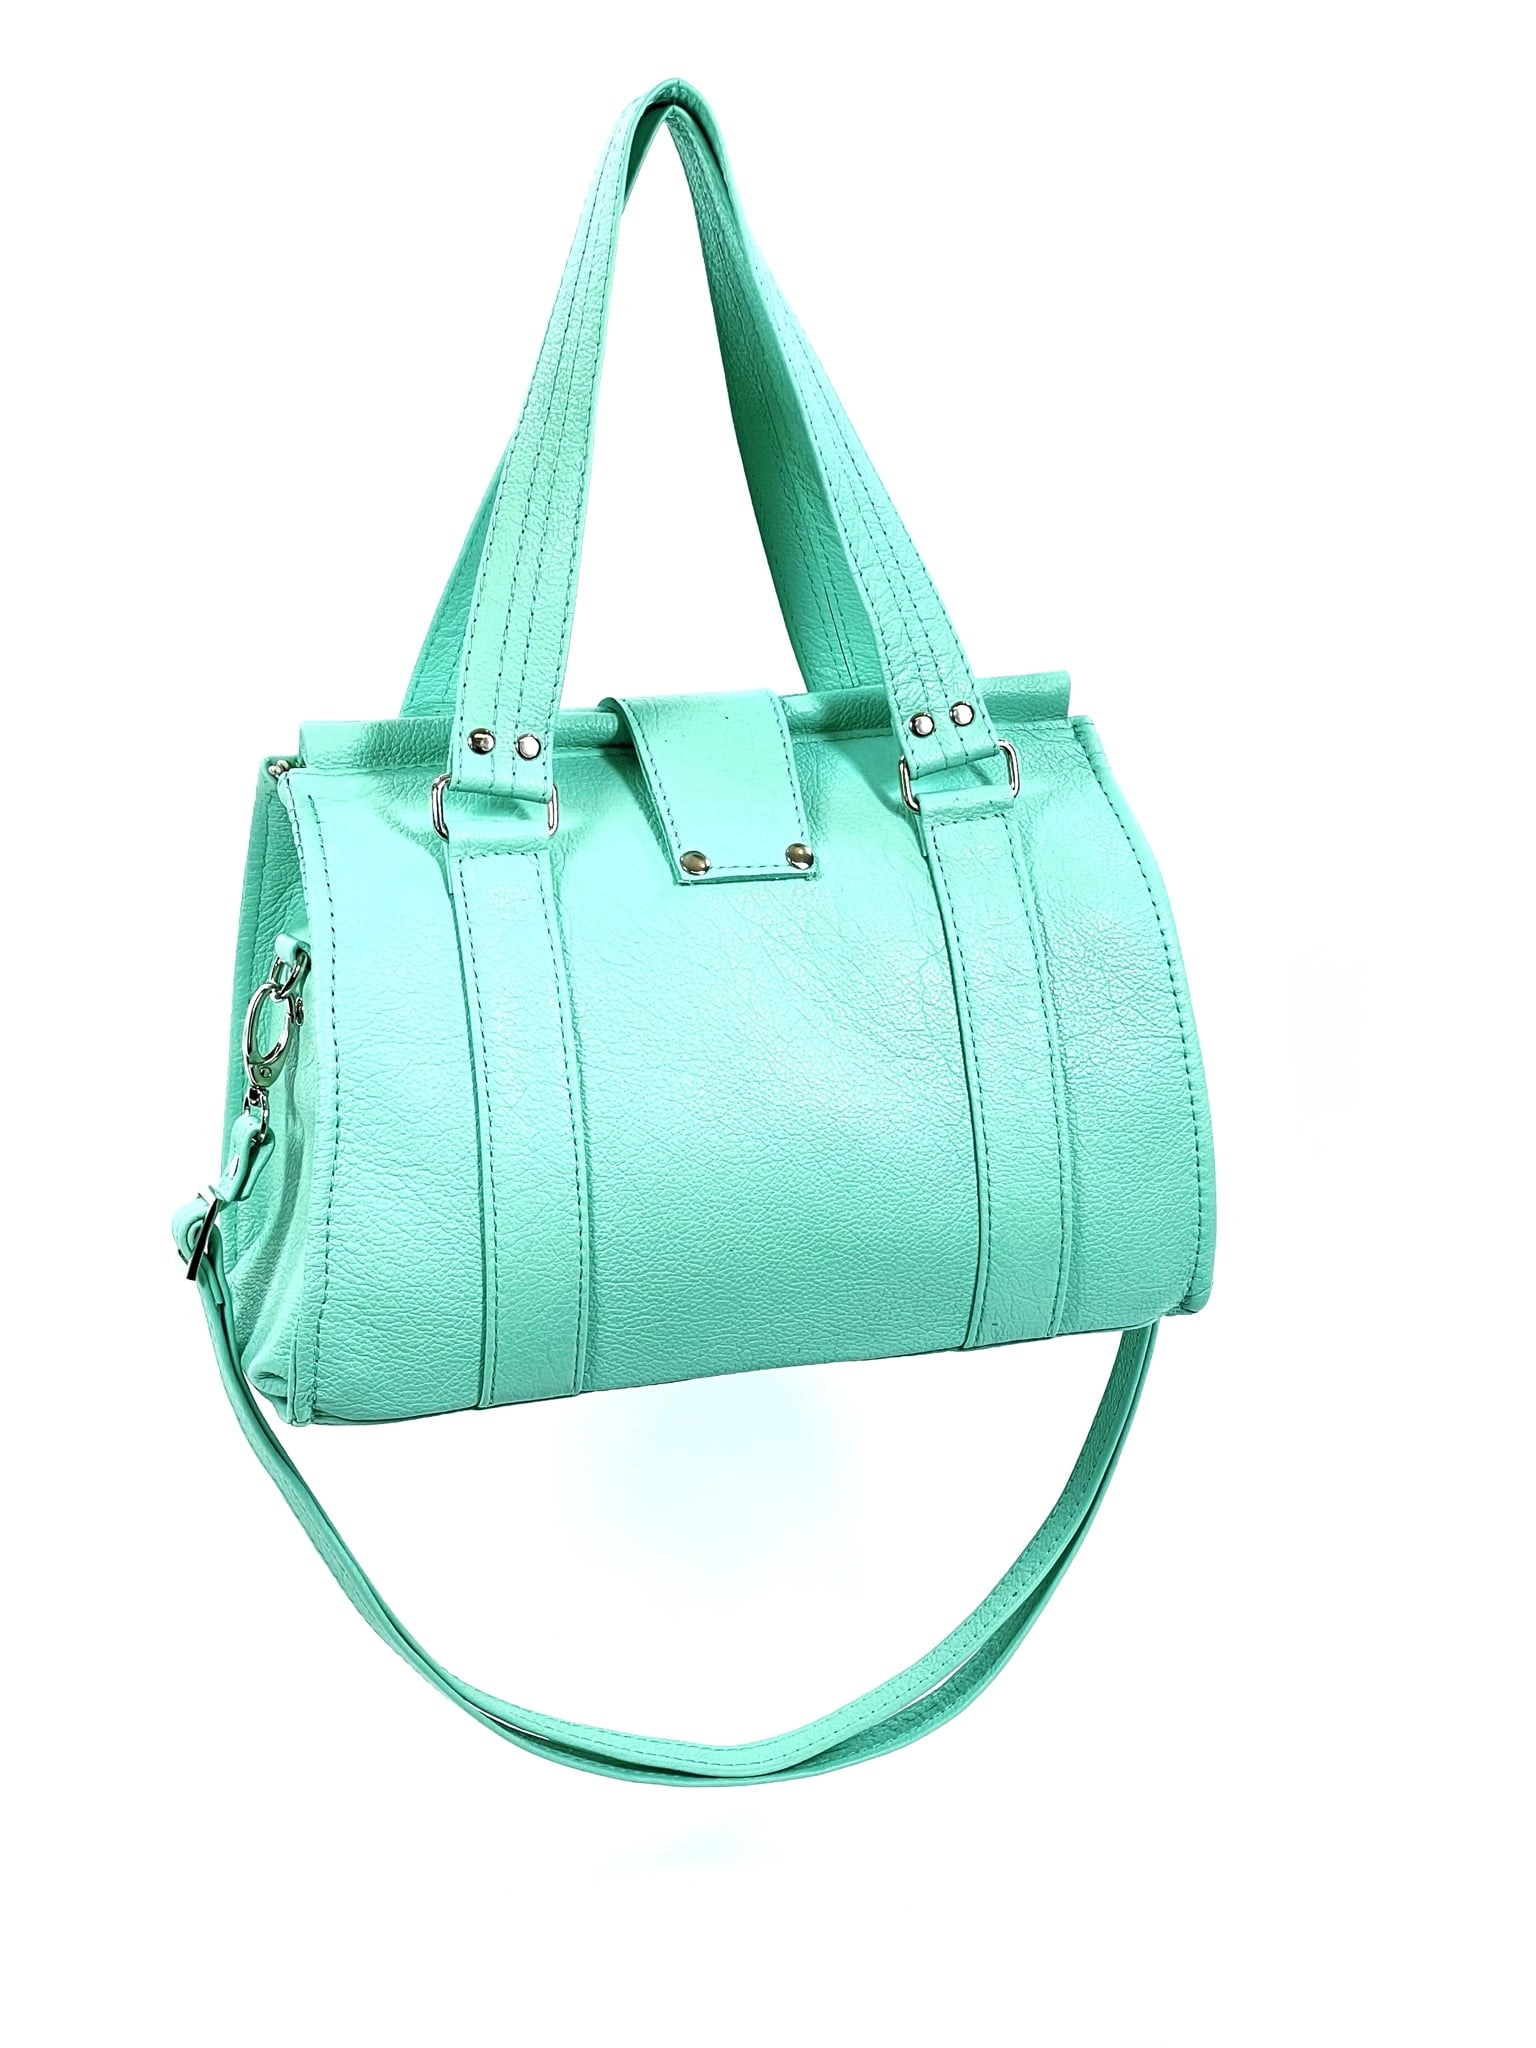 Natalie Mint Green Leather Satchel back view